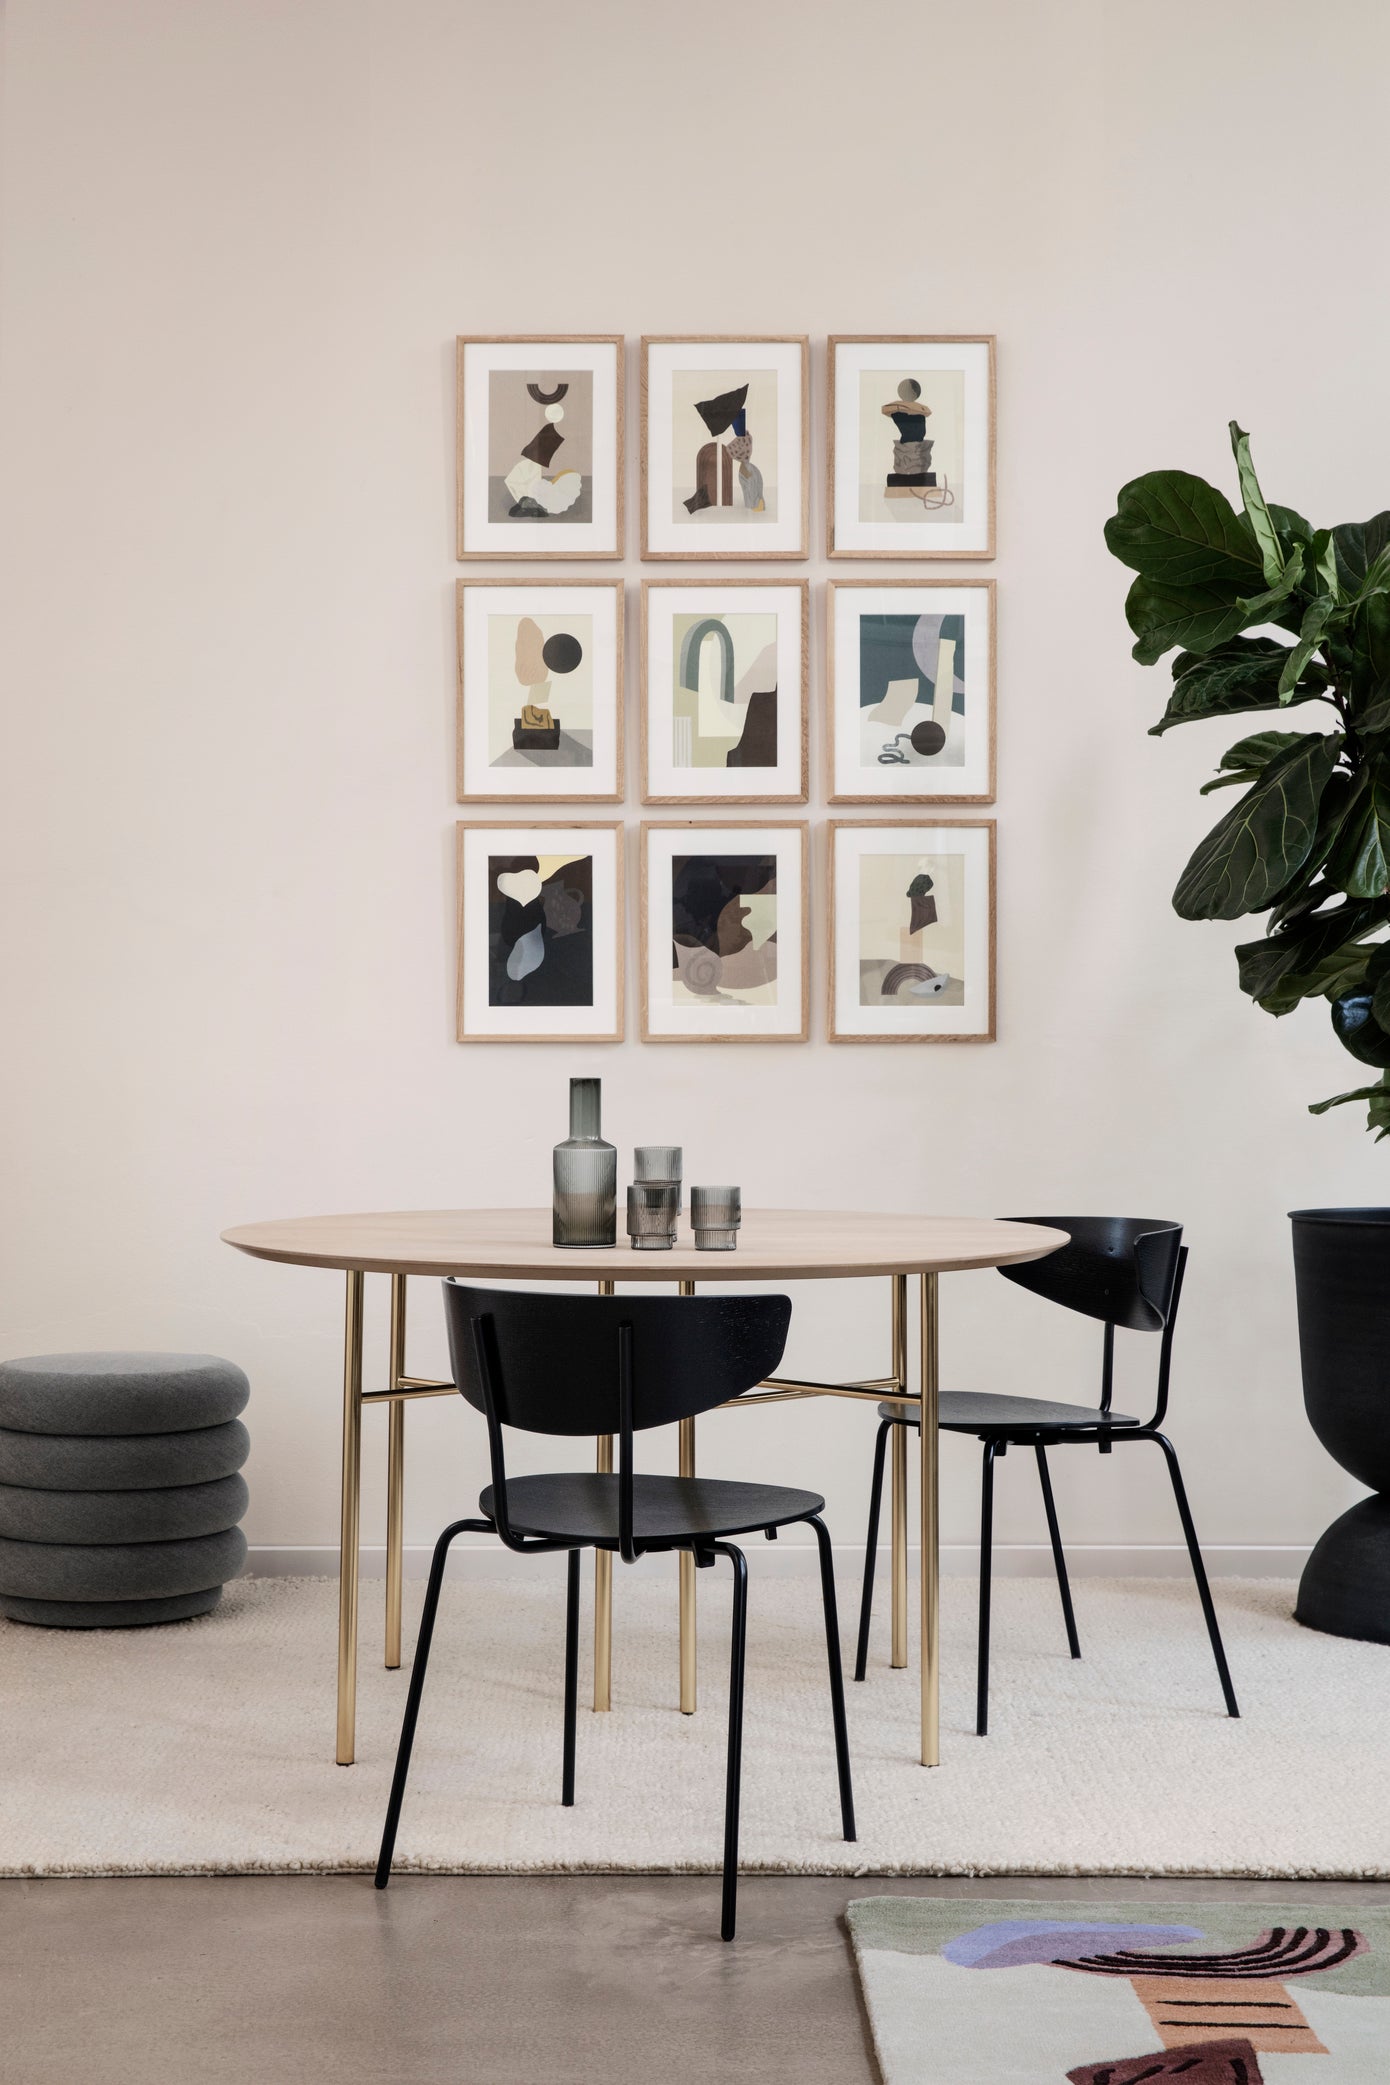 Herman Chair In Black With Leather Seat - Lifestory - ferm LIVING